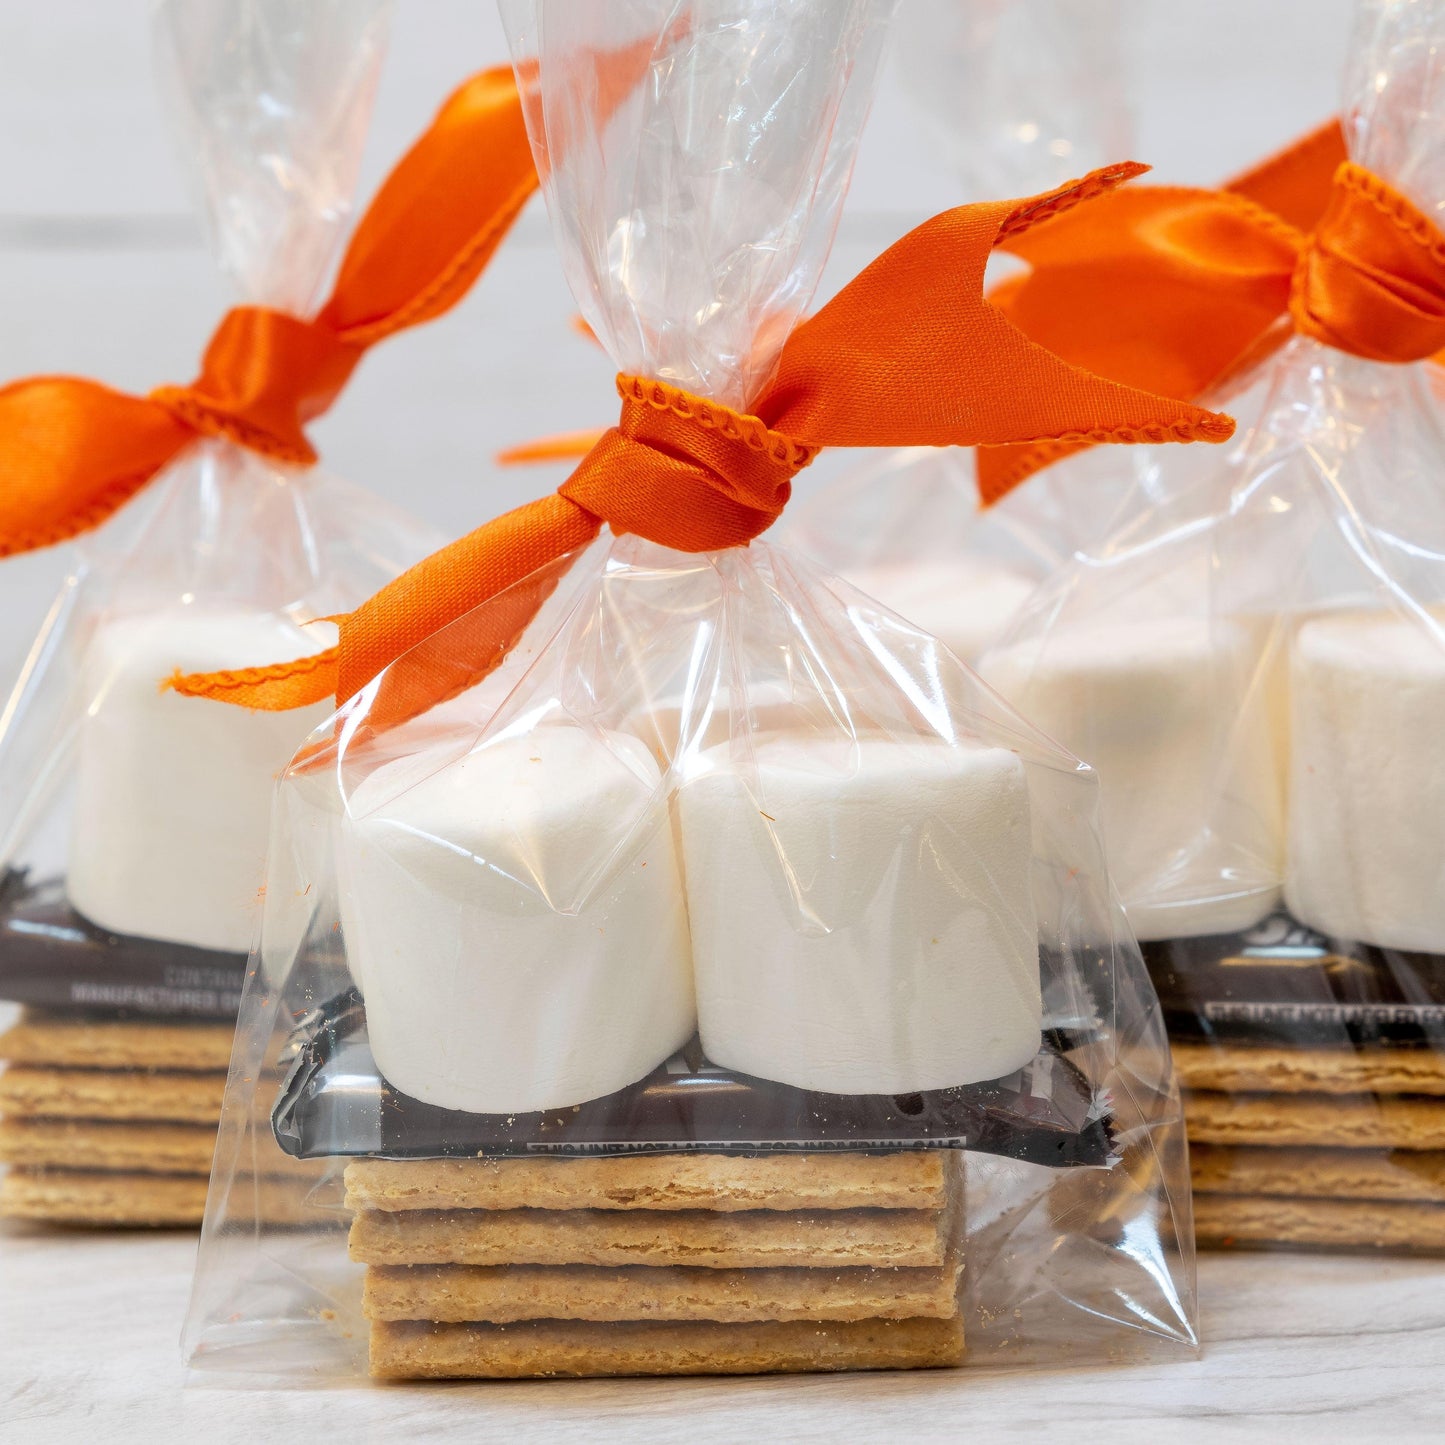 S’mores Kit - 4 pack - Vacation Delivery Service - Bundle